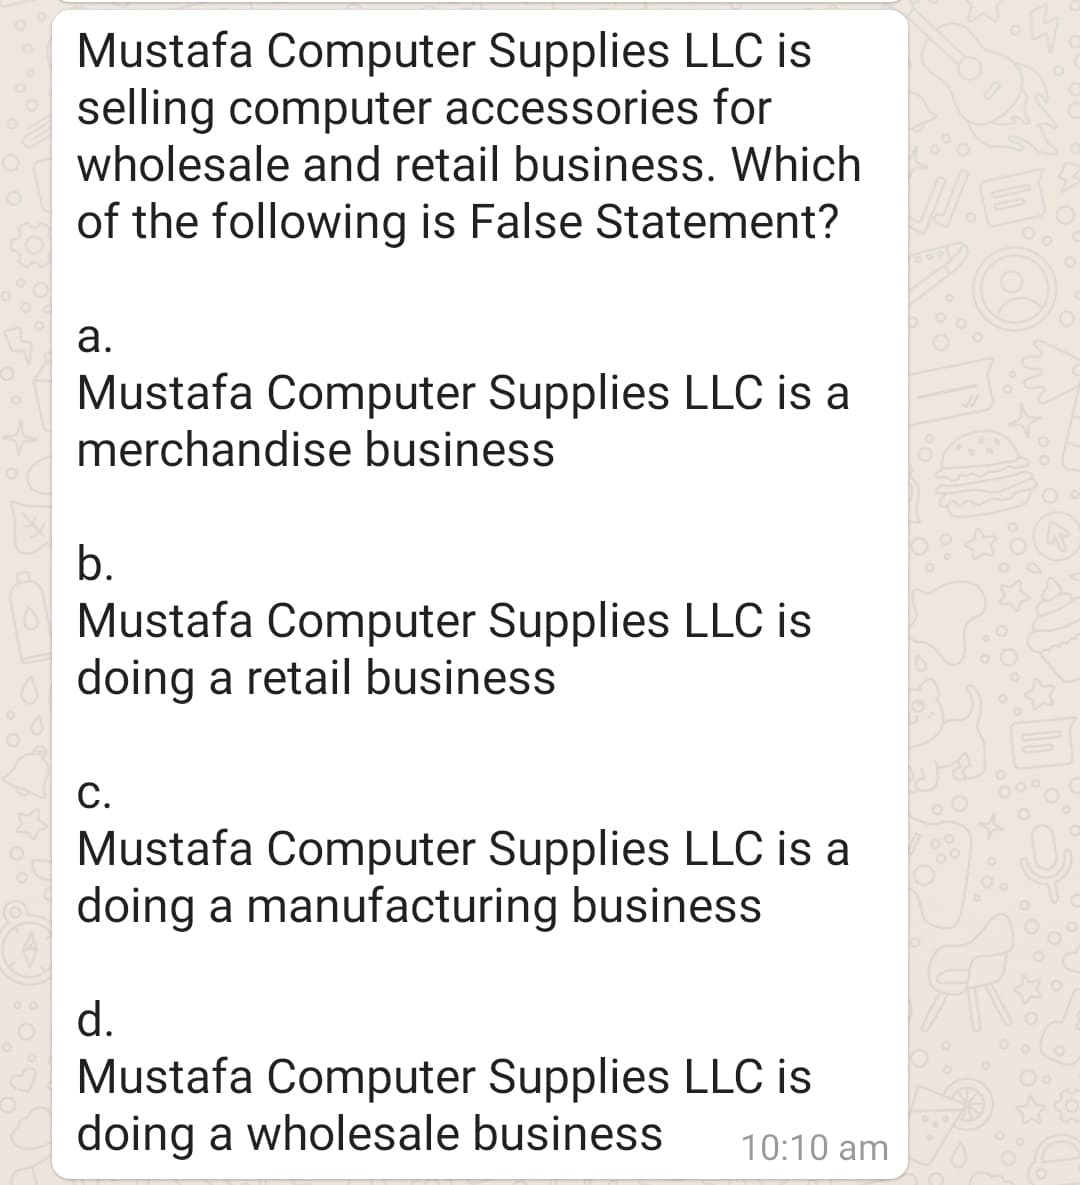 Mustafa Computer Supplies LLC is
selling computer accessories for
wholesale and retail business. Which
of the following is False Statement?
а.
Mustafa Computer Supplies LLC is a
merchandise business
b.
Mustafa Computer Supplies LLC is
doing a retail business
С.
000
Mustafa Computer Supplies LLC is a
doing a manufacturing business
d.
Mustafa Computer Supplies LLC is
doing a wholesale business
10:10 am
